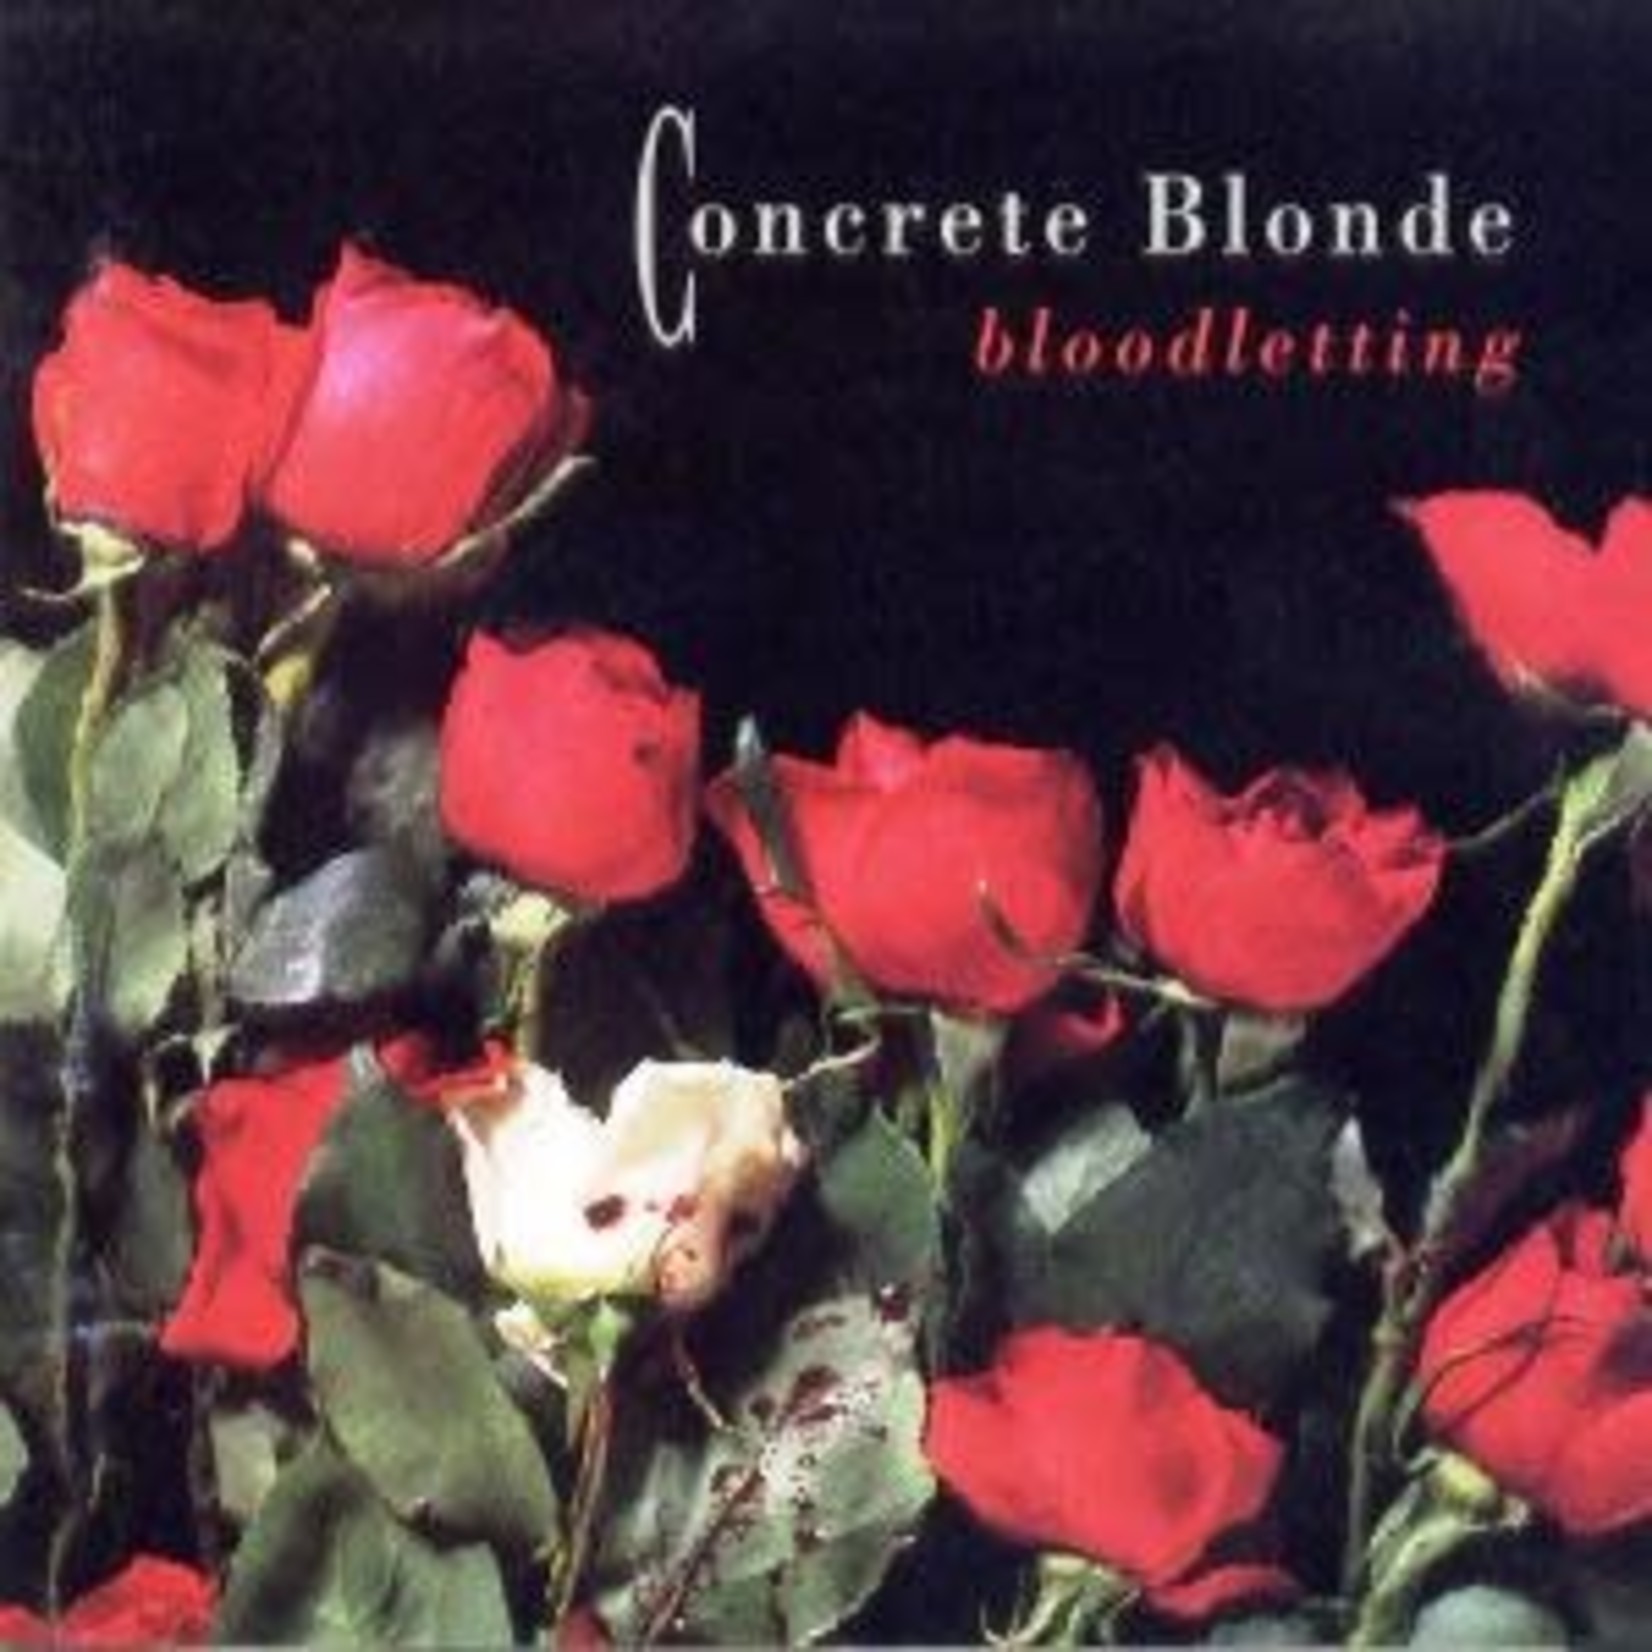 Concrete Blonde - Bloodletting [USED CD]